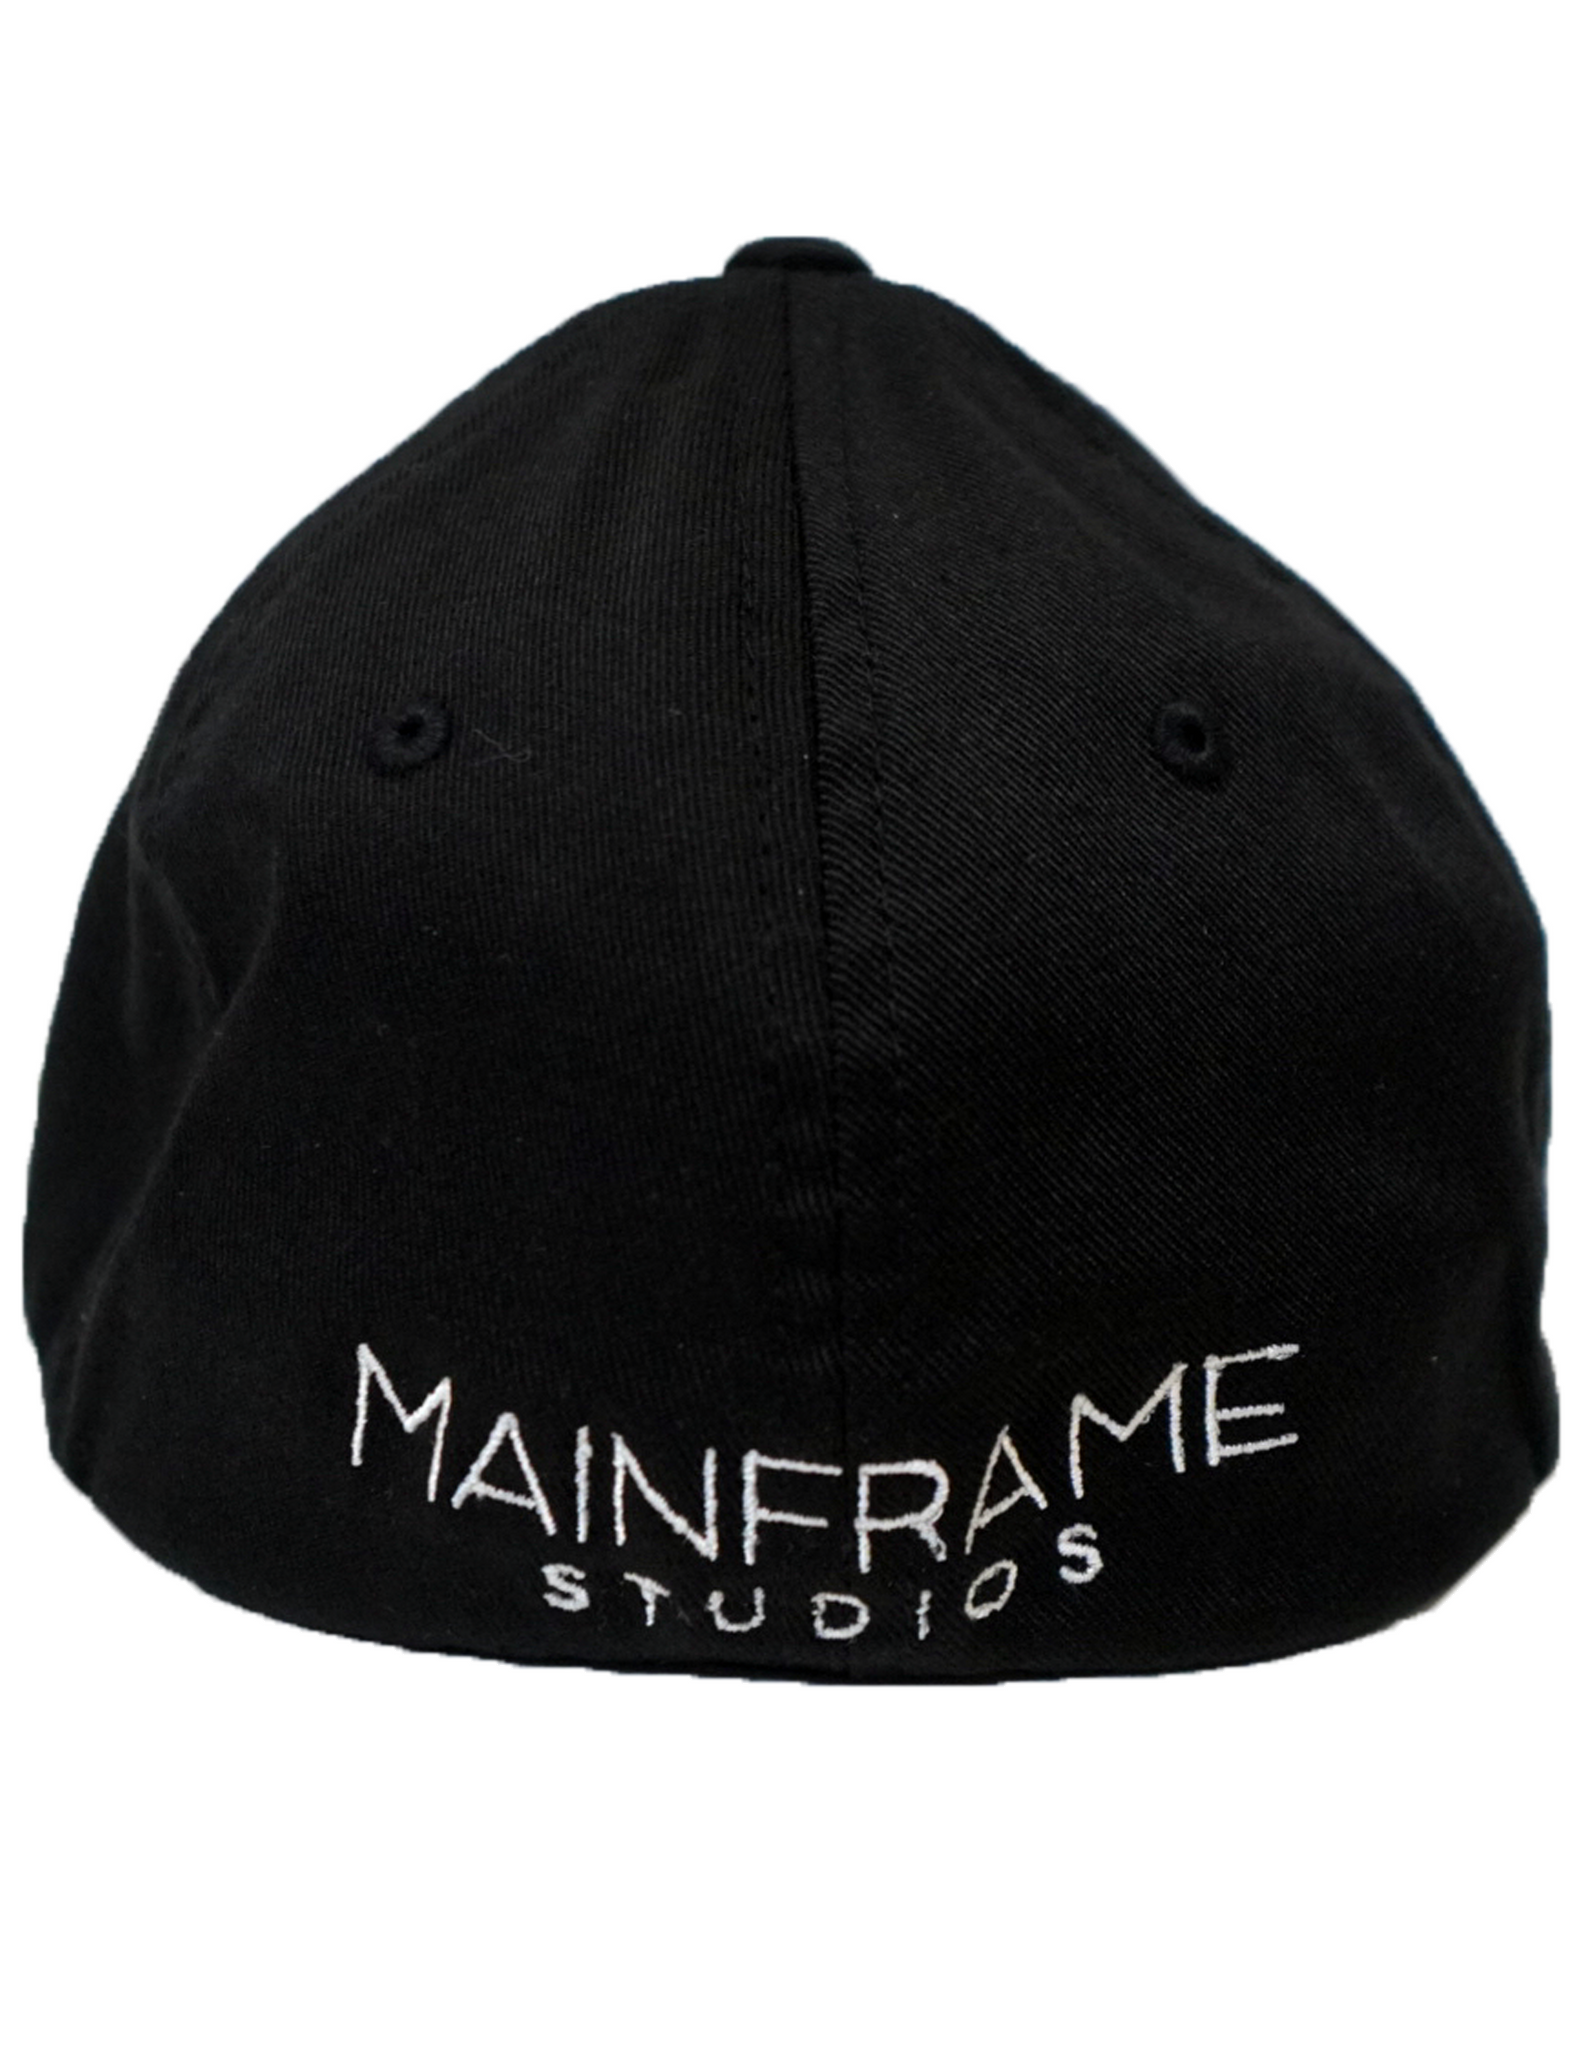 Mainframe Studio's Artist Hats DESIGNED BY THE STREETS